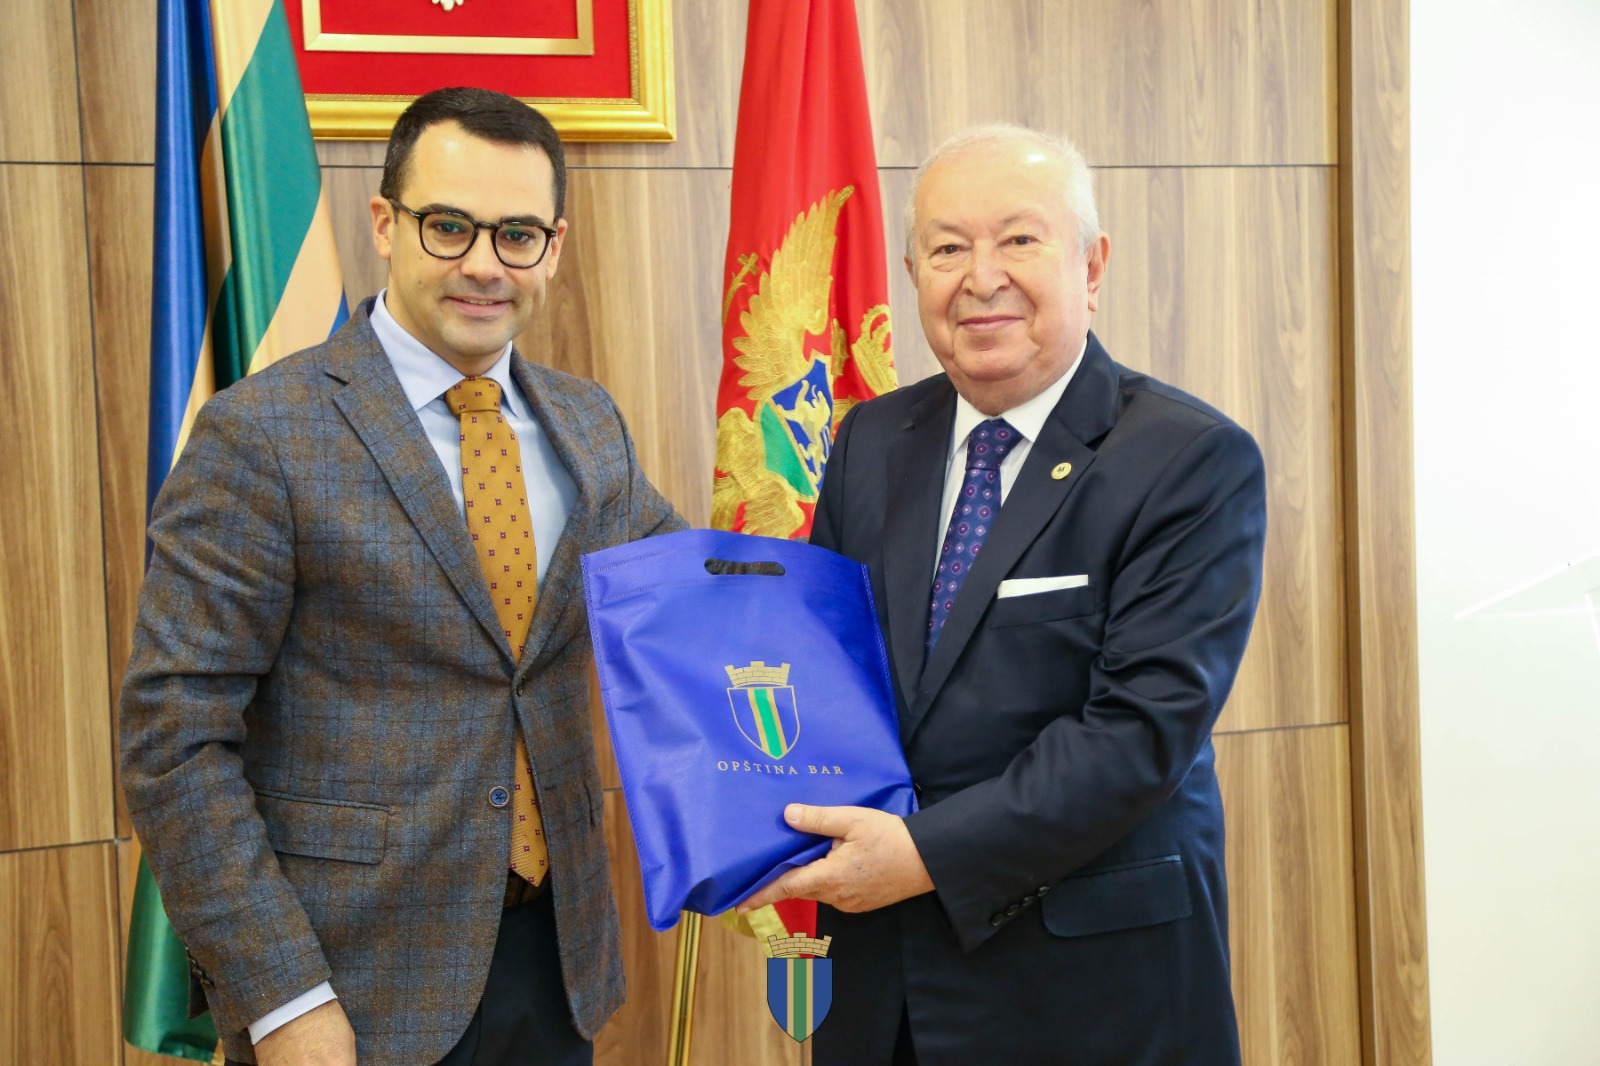 The Mayor of Bar met with the President of the Marmara 